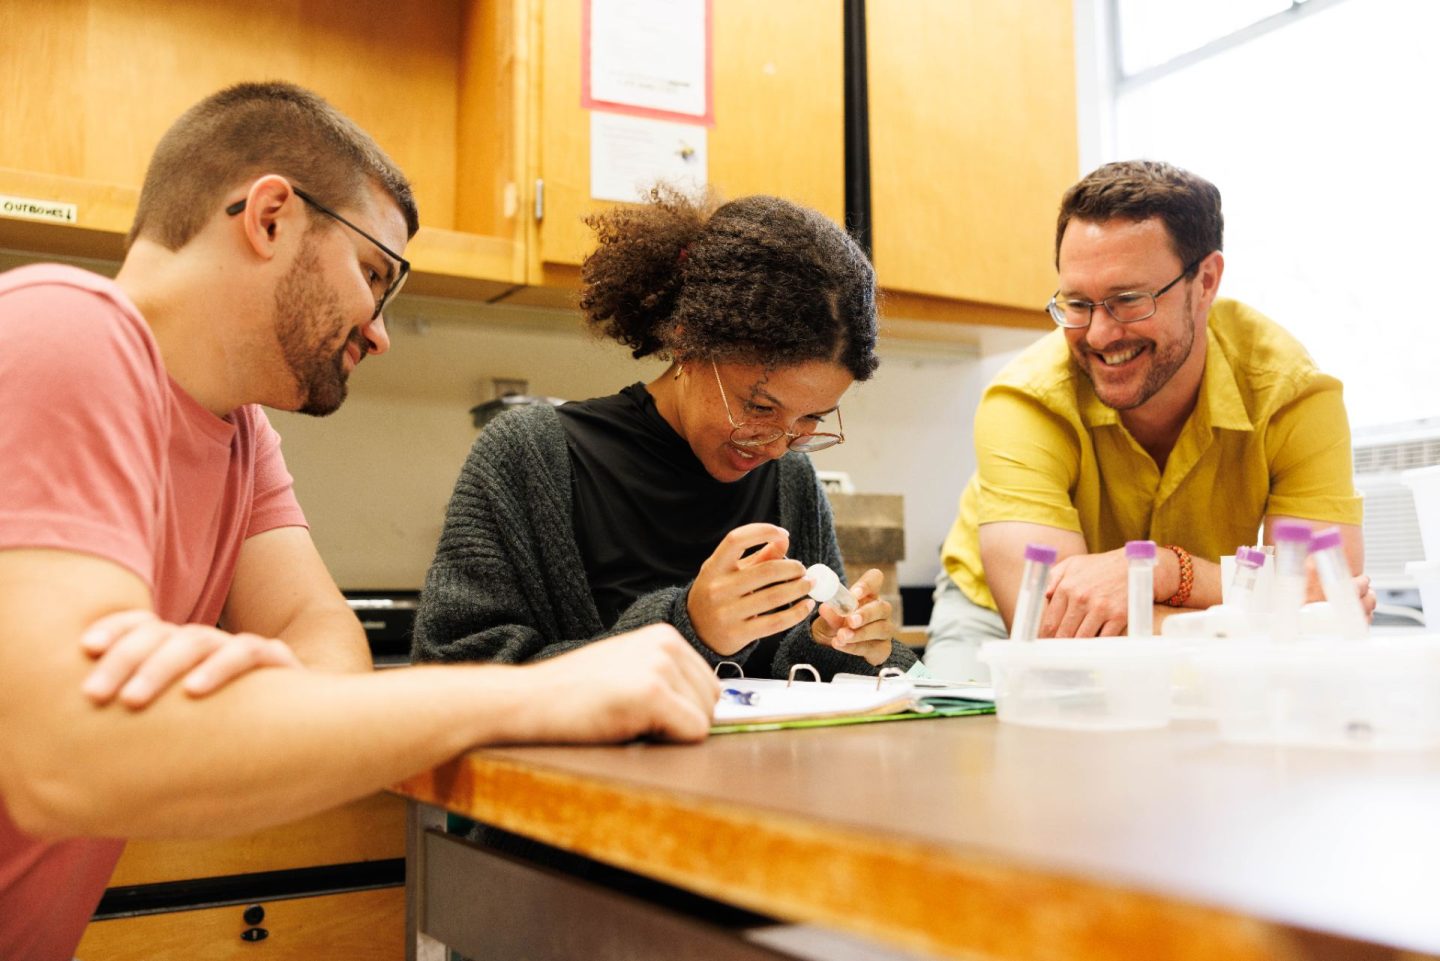 Amélie Mwilambwe, center, has been getting an early start on research in Dr. Ben Sadd's lab. Sadd, right, and Dr. Logan Sauers, left, have been mentoring her through a project for which she received grant support.